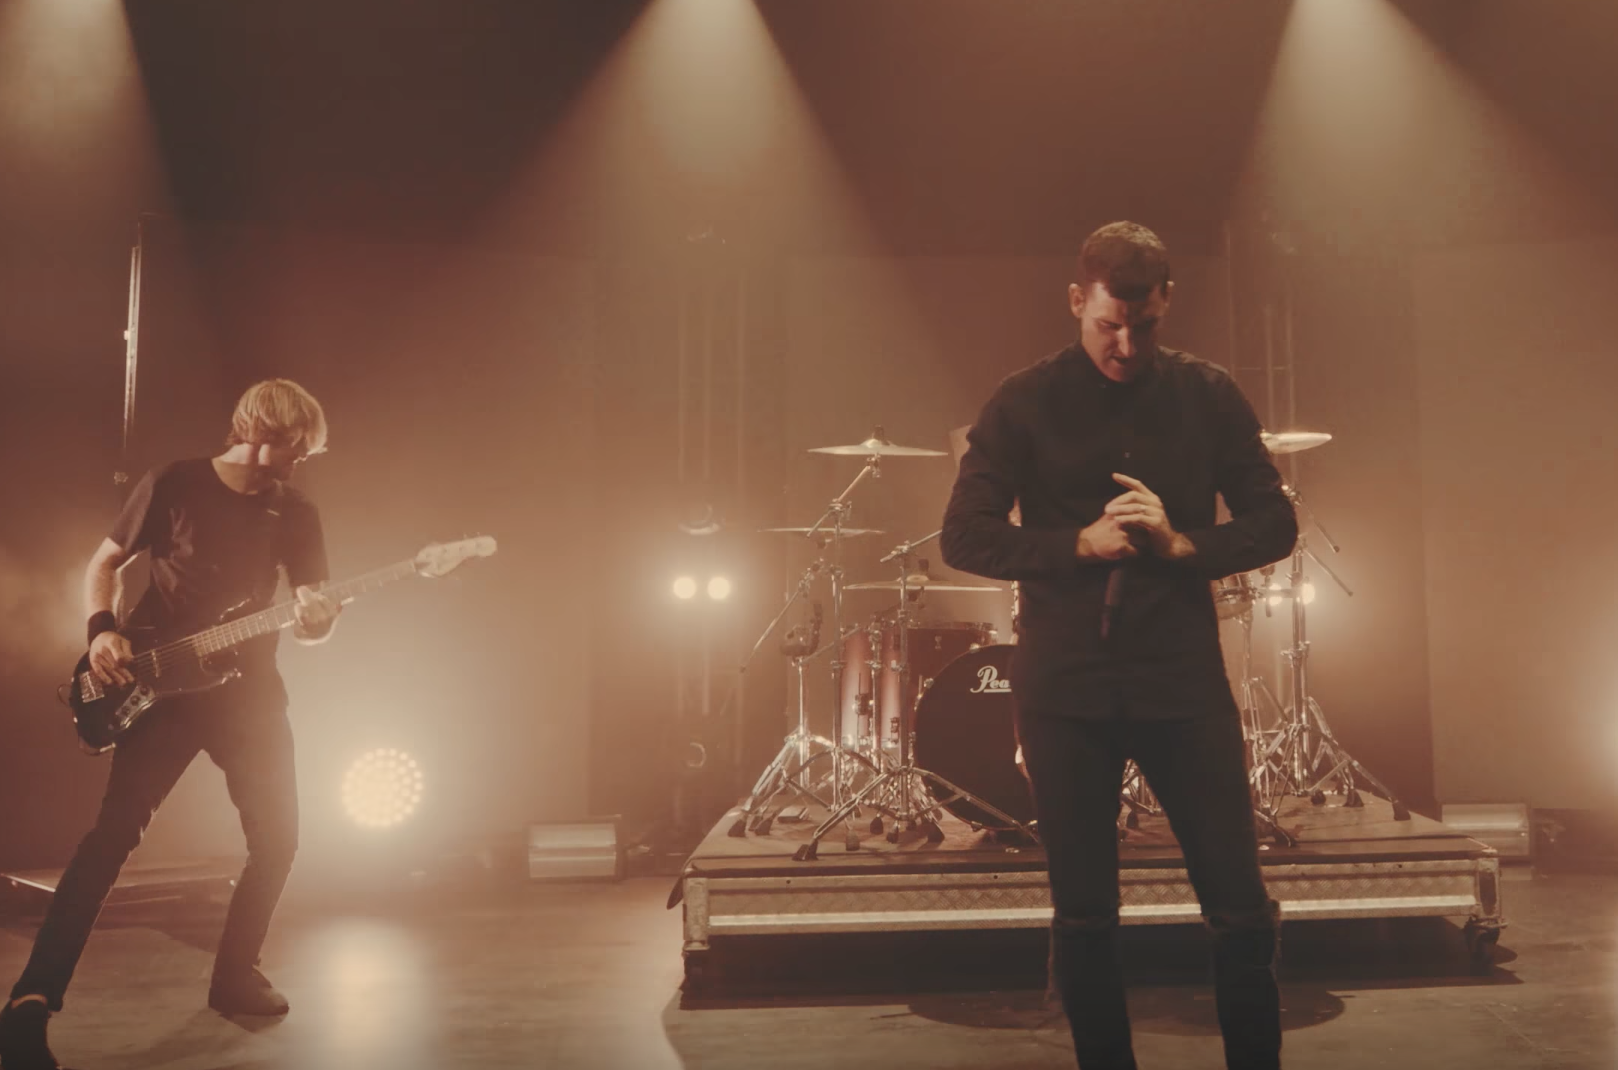 Hear Parkway Drive Confront Faith Human Frailty On Powerful New Song Prey Revolver All lyrics are subject to us copyright laws and are property of their respective authors, artists and labels. hear parkway drive confront faith